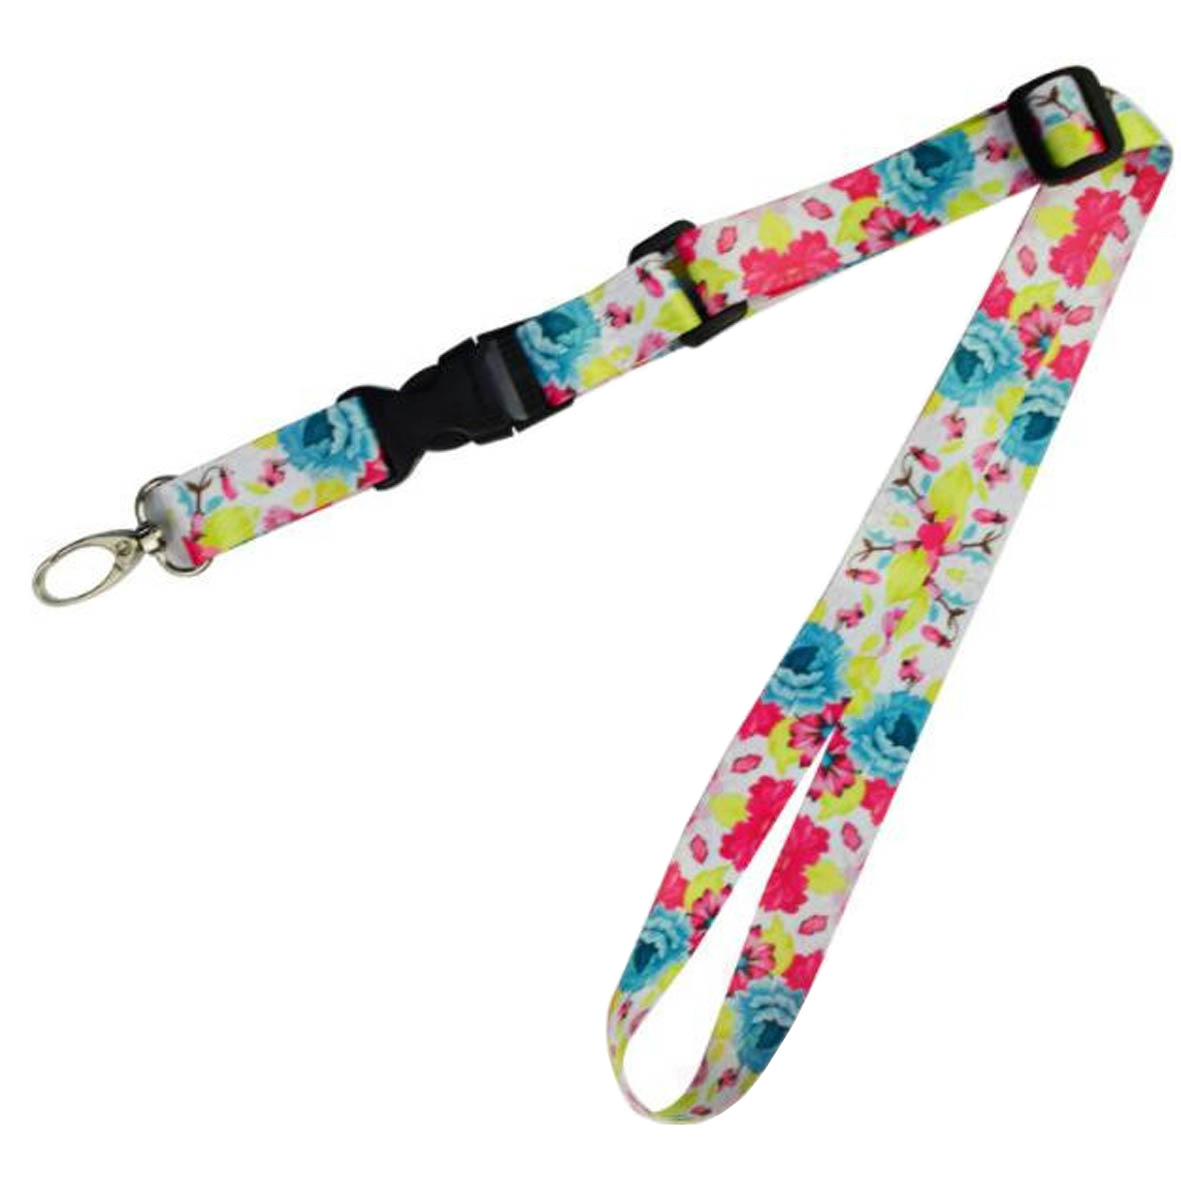 GL-ELY1326 Polyester Heat Transfer Student's Lanyard